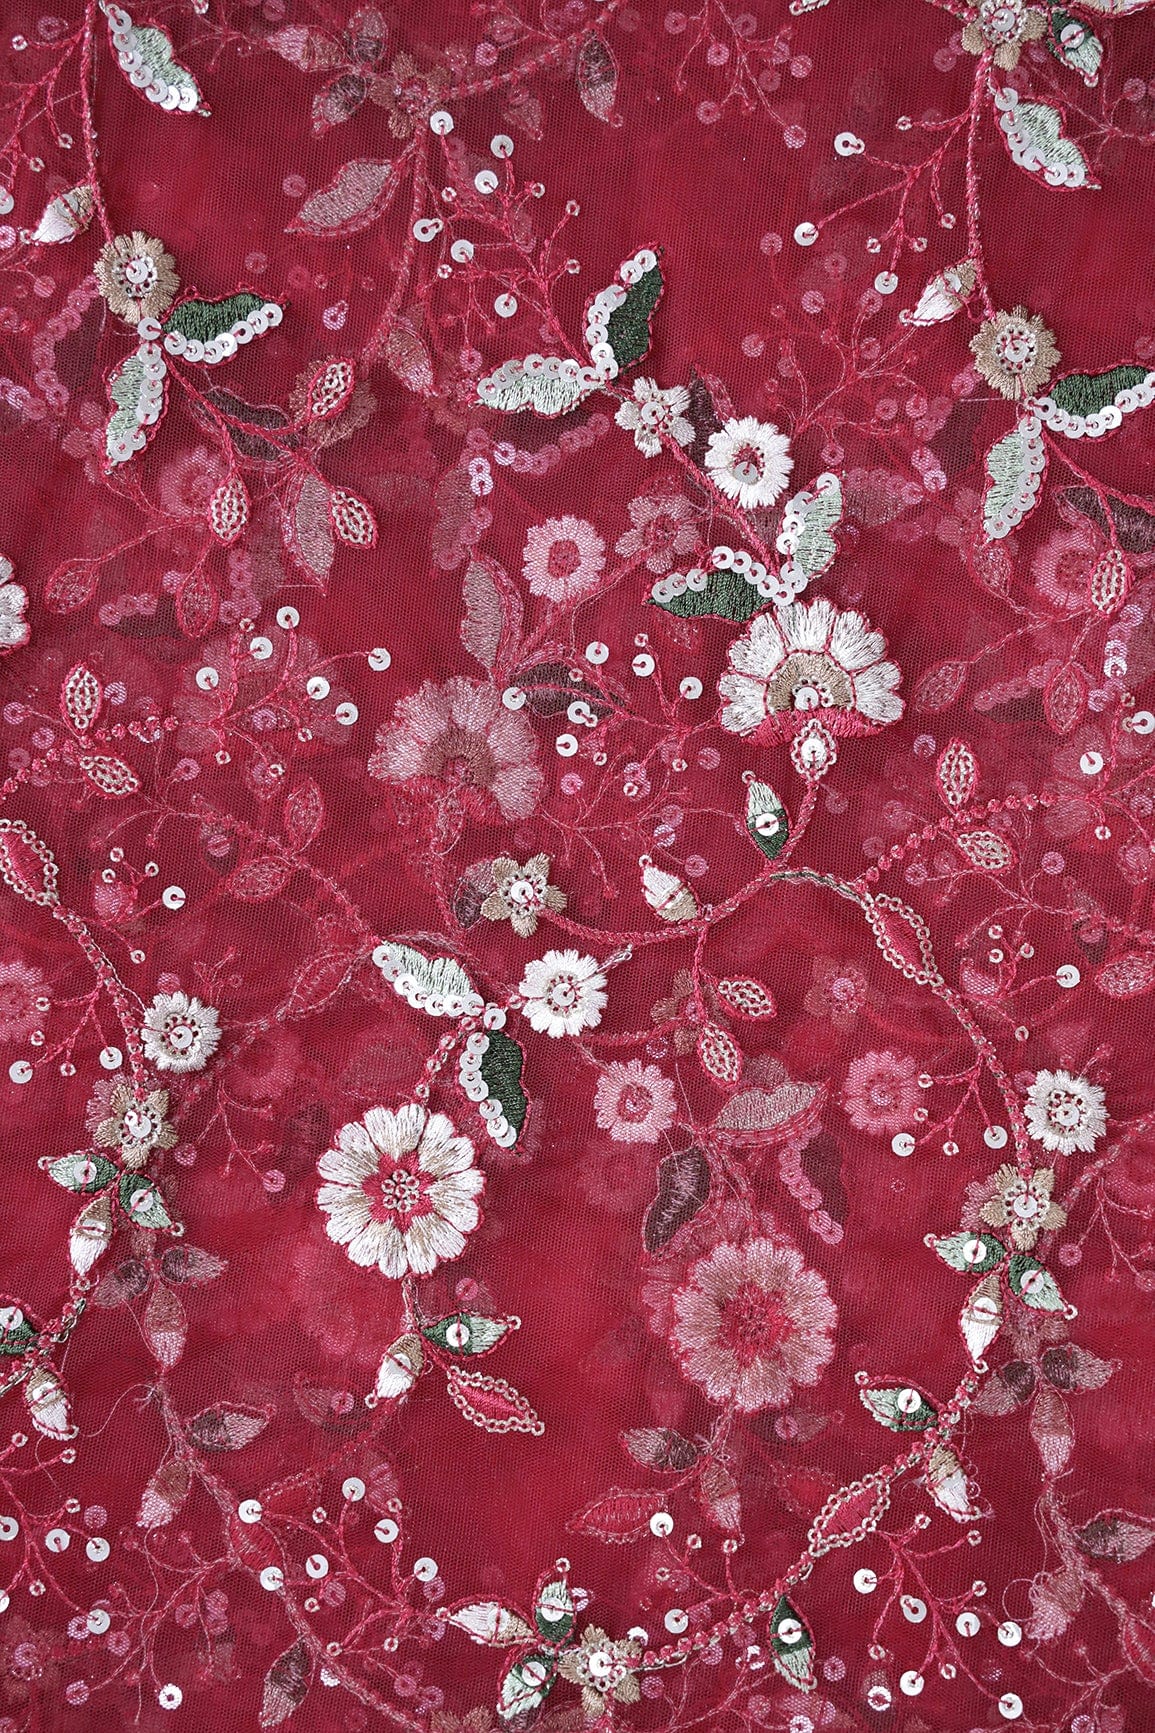 doeraa Embroidery Fabrics White And Red Thread With Gold Sequins Floral Embroidery Work On Red Soft Net Fabric